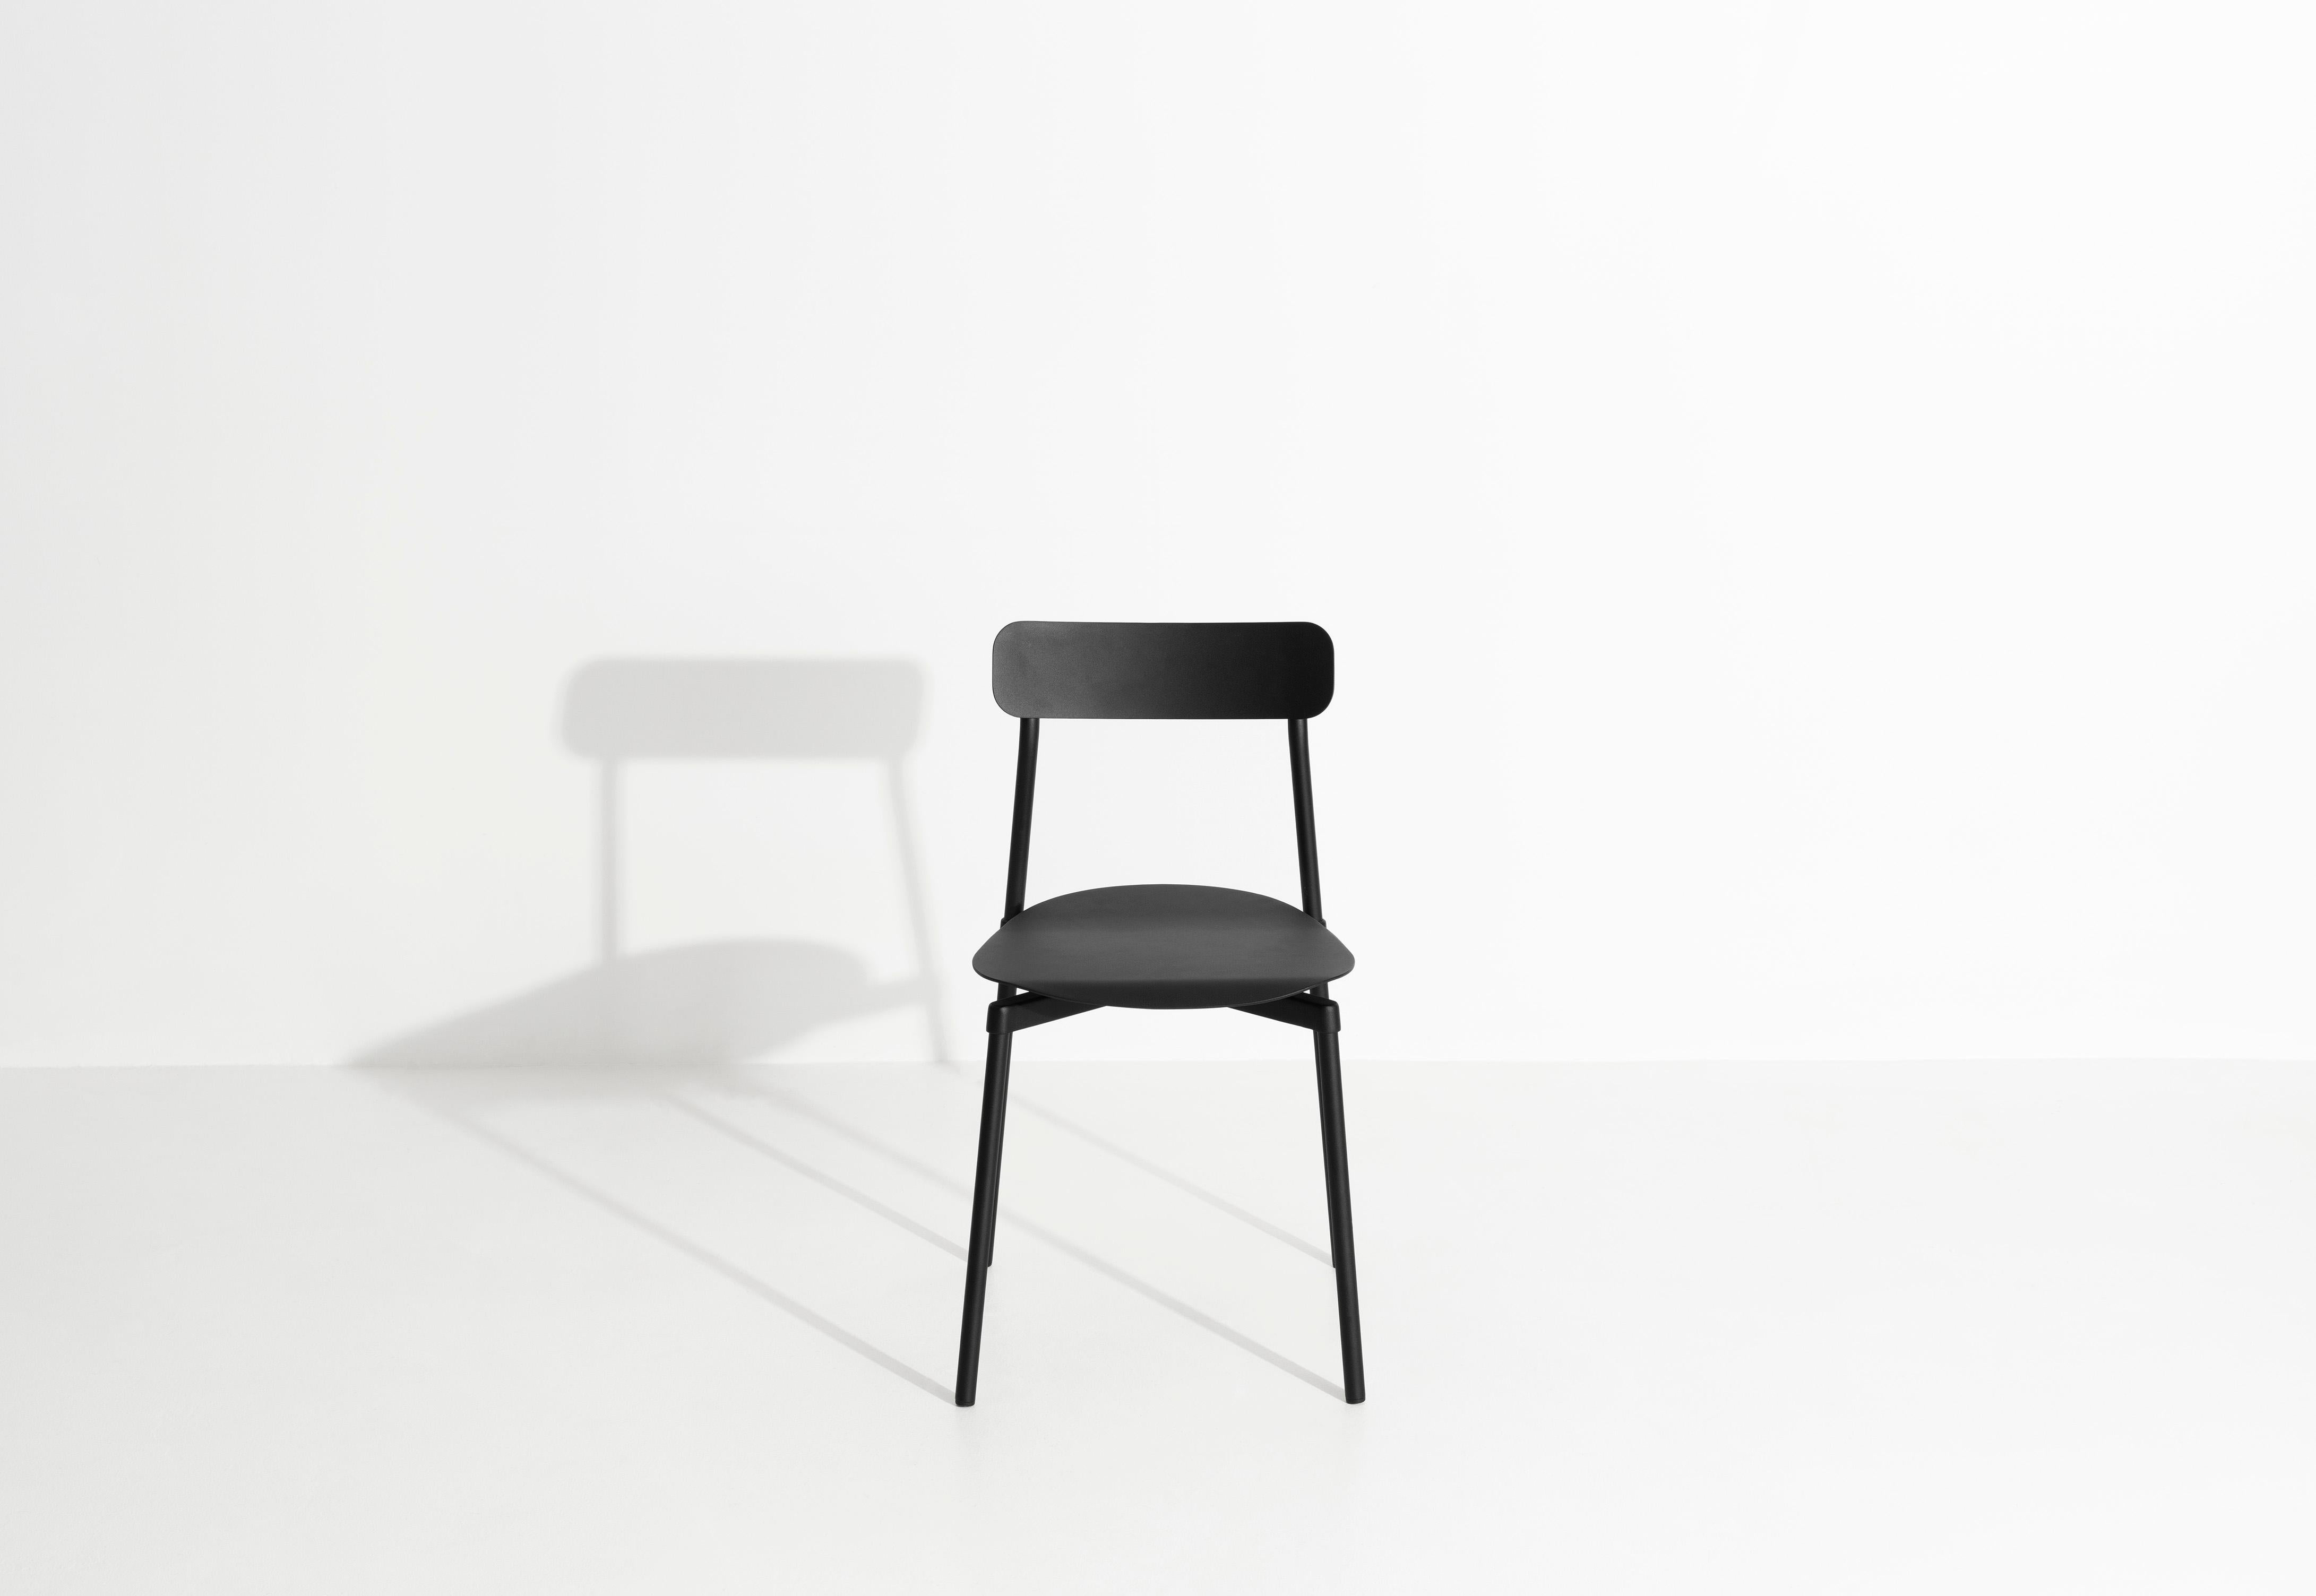 Chinese Petite Friture Fromme Chair in Black Aluminium by Tom Chung, 2019 For Sale